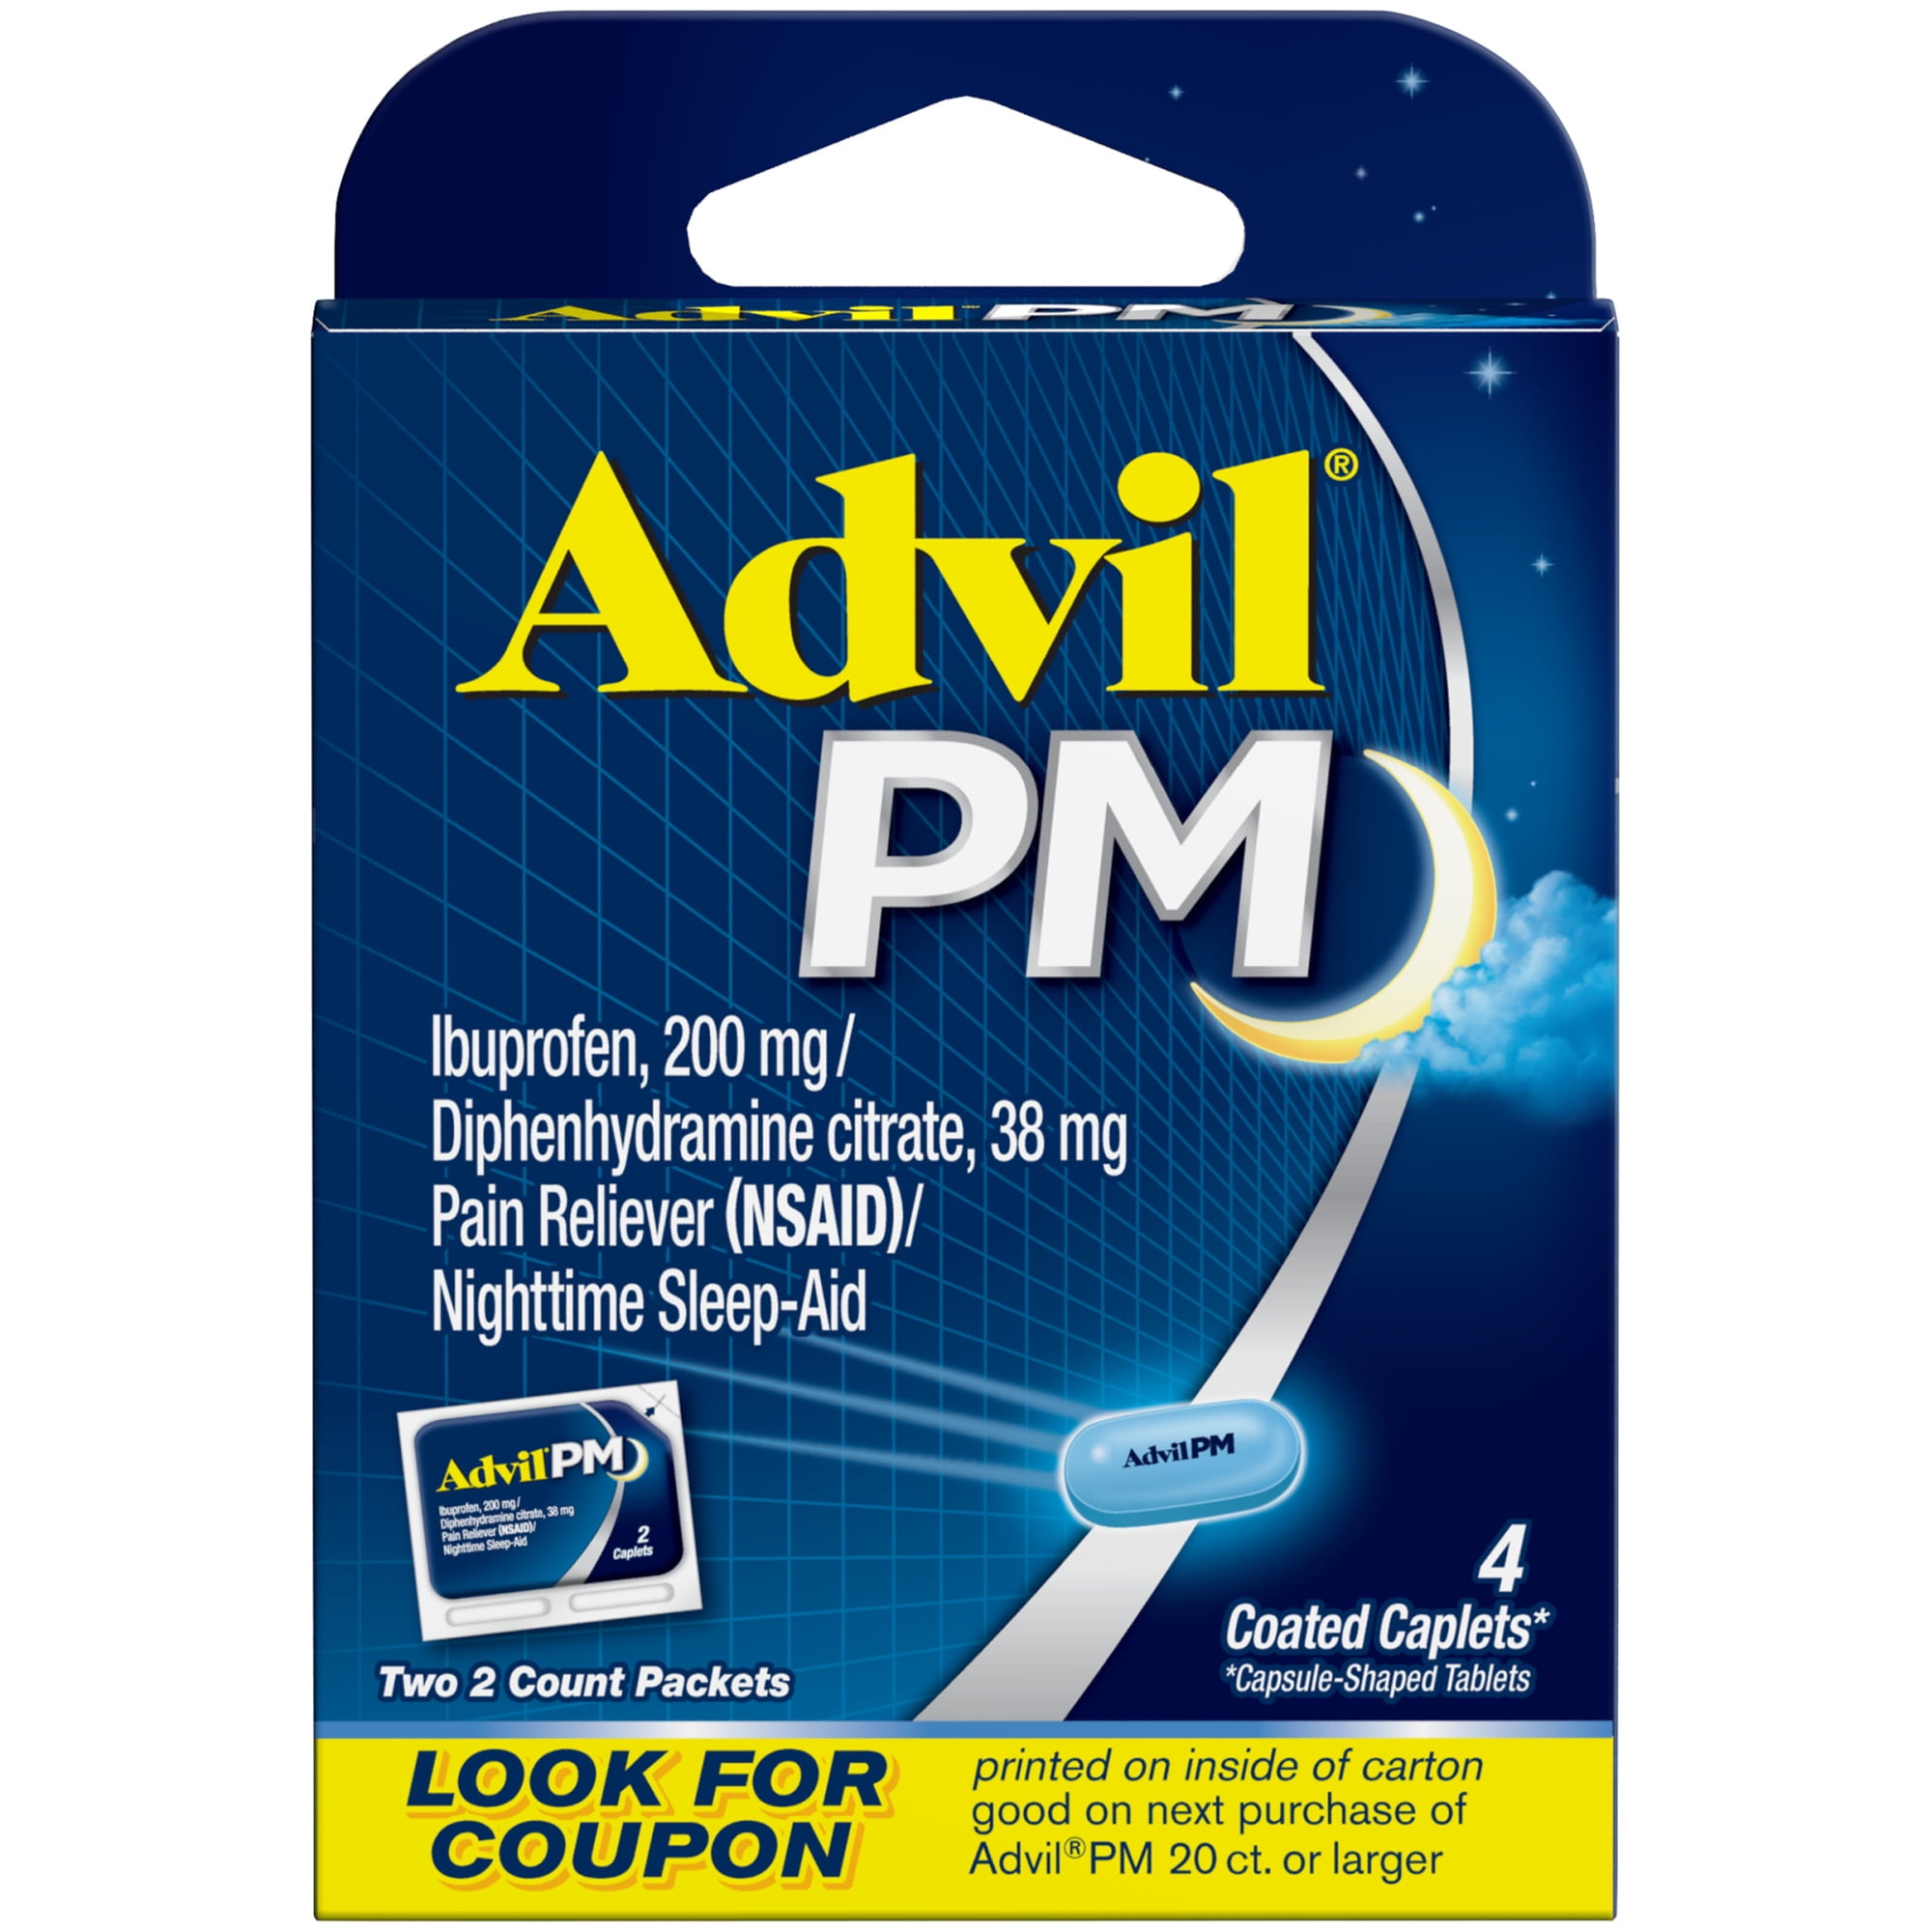 advil-pm-4-count-in-pack-coupon-pain-reliever-nighttime-sleep-aid